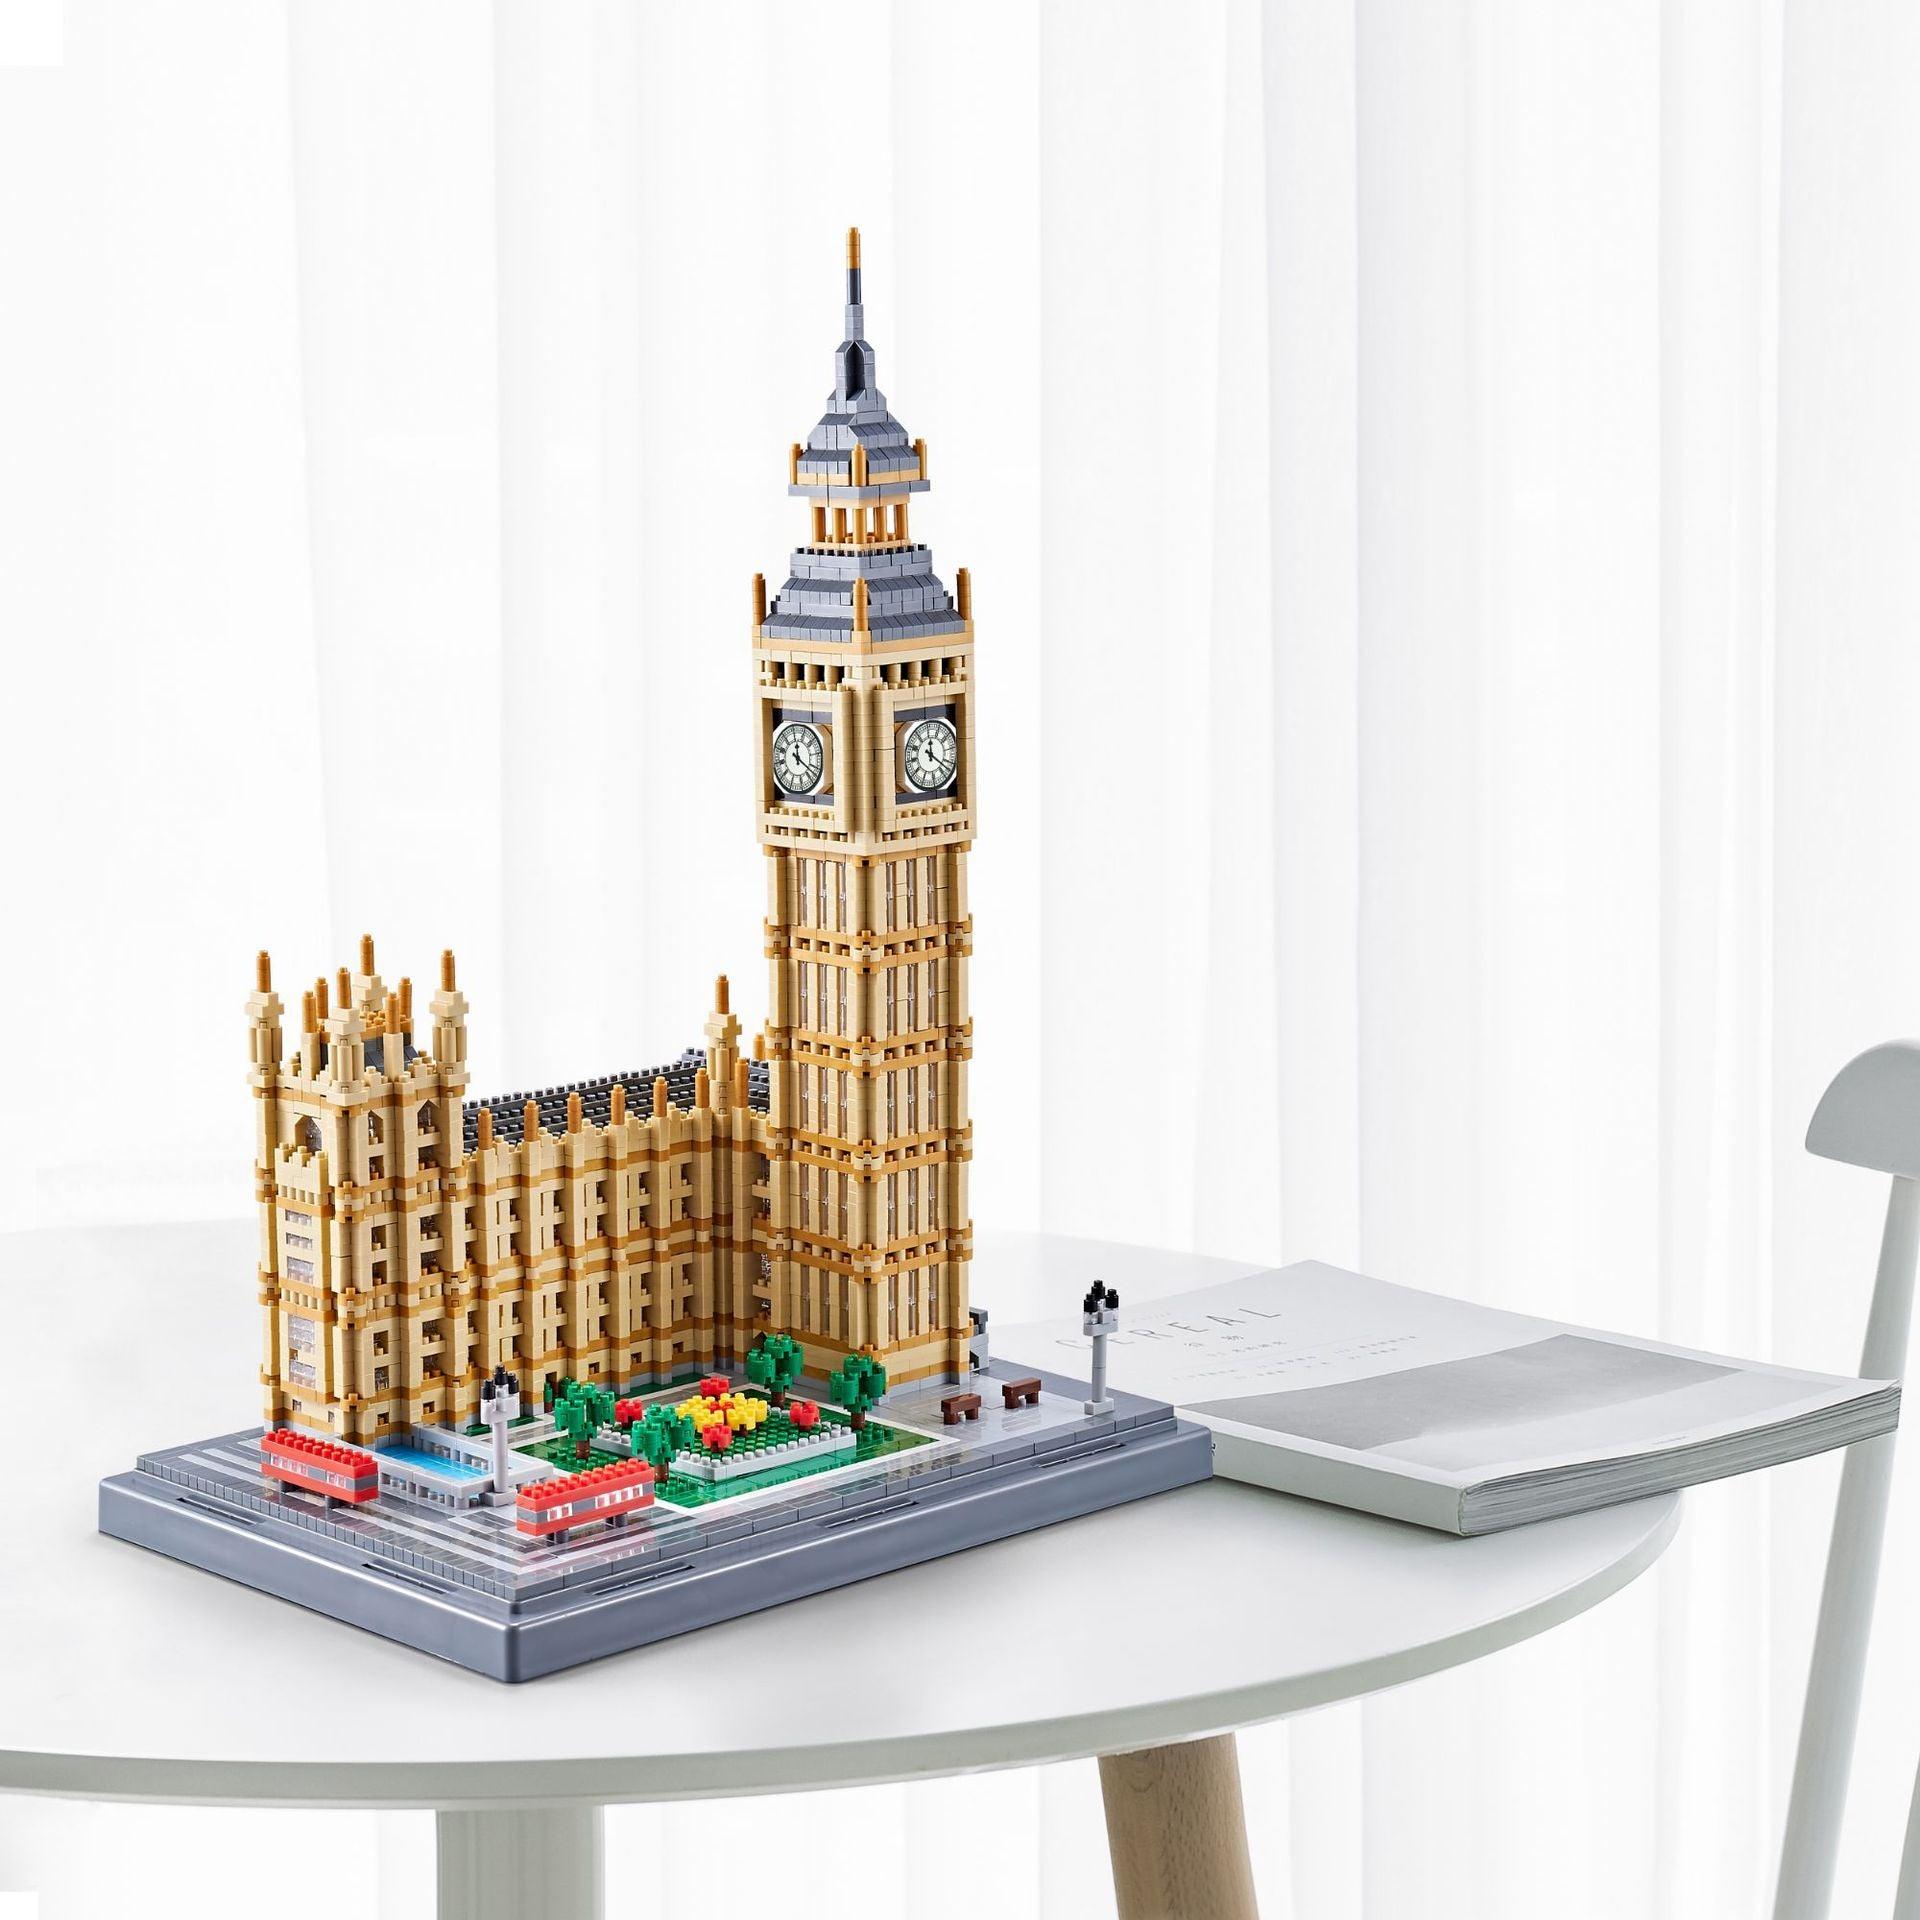 6473 Pcs Big Ben Collector's Edition Building Blocks Toy - Enhance Focus, Divert Attention, and Relieve Anxiety - PANSEKtoy